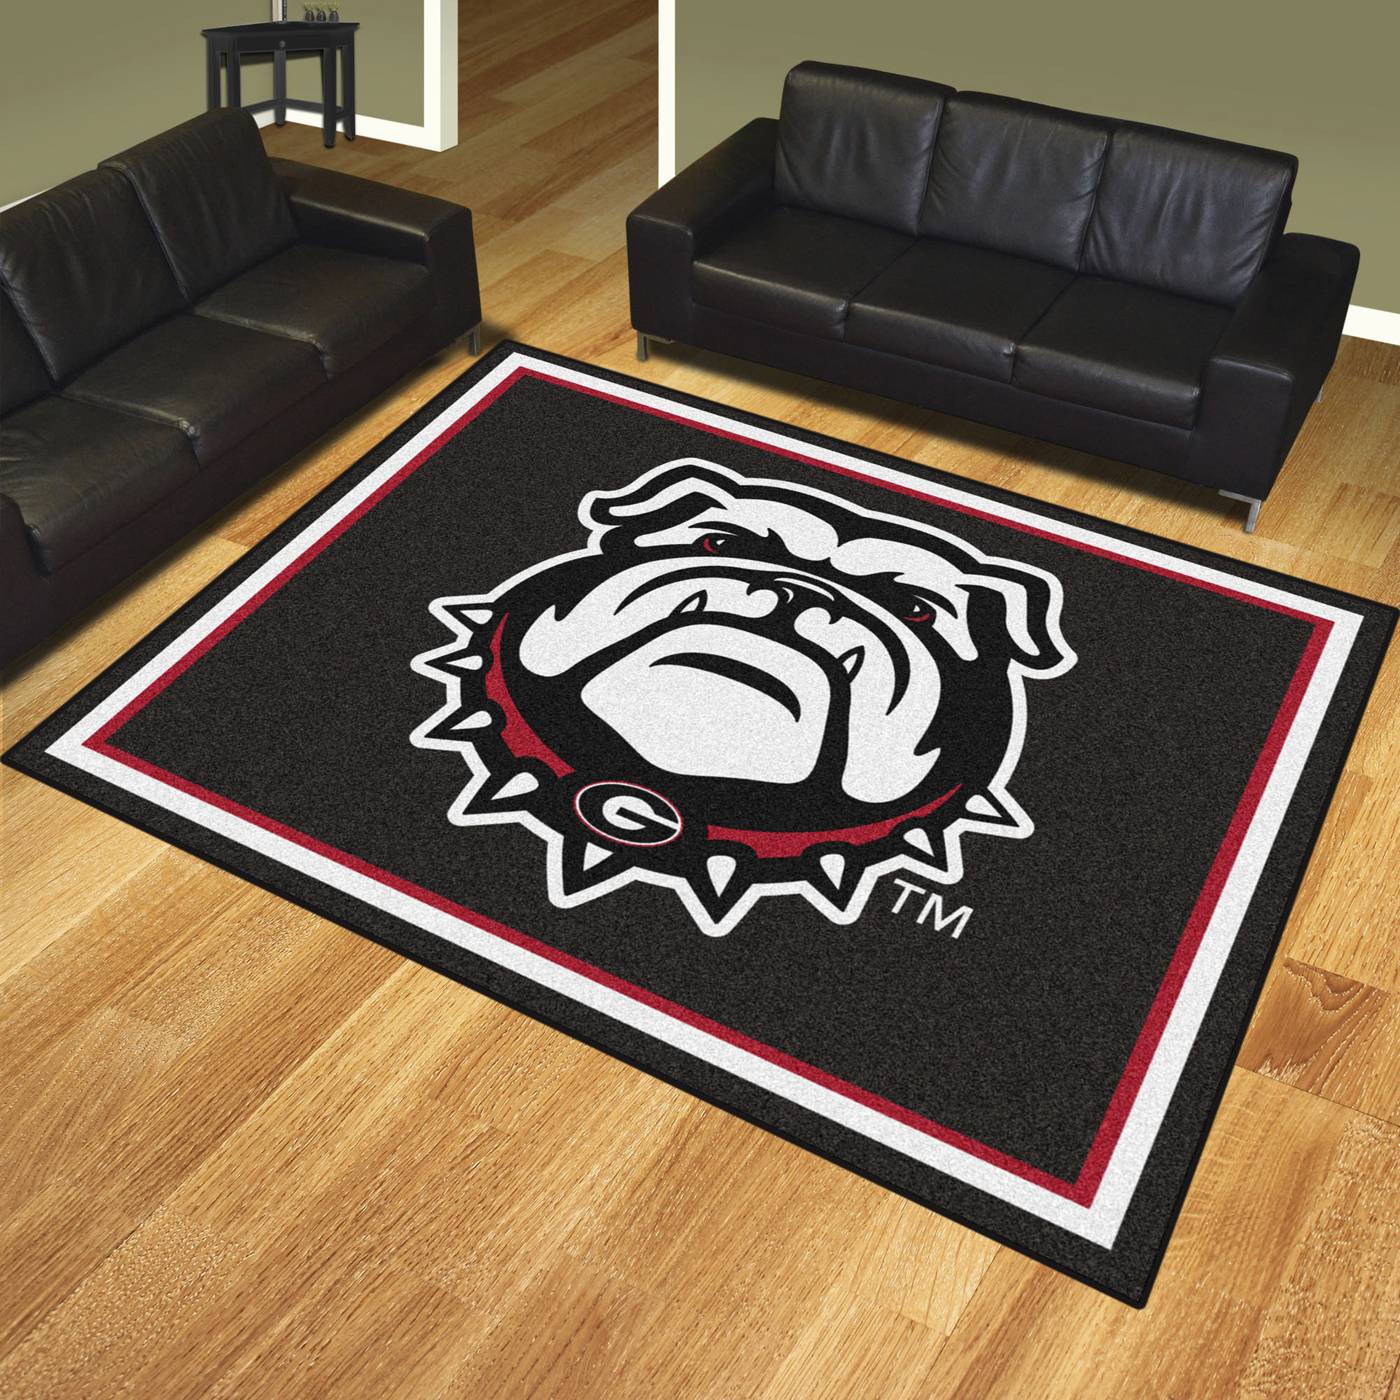 Great Ga Bulldog Rug of the decade Don t miss out 